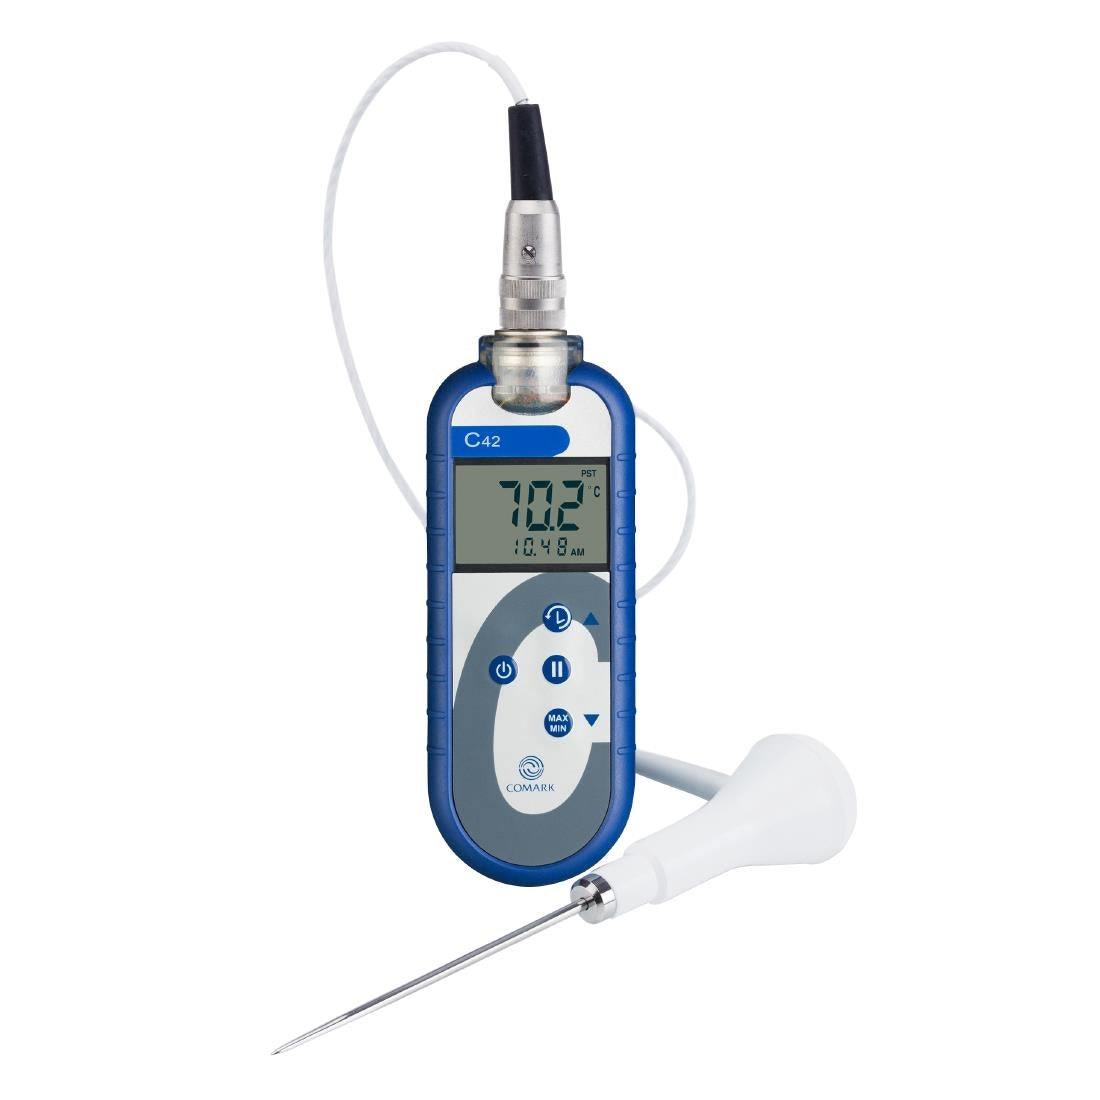 CU746 Comark C42C Food Thermometer Kit JD Catering Equipment Solutions Ltd